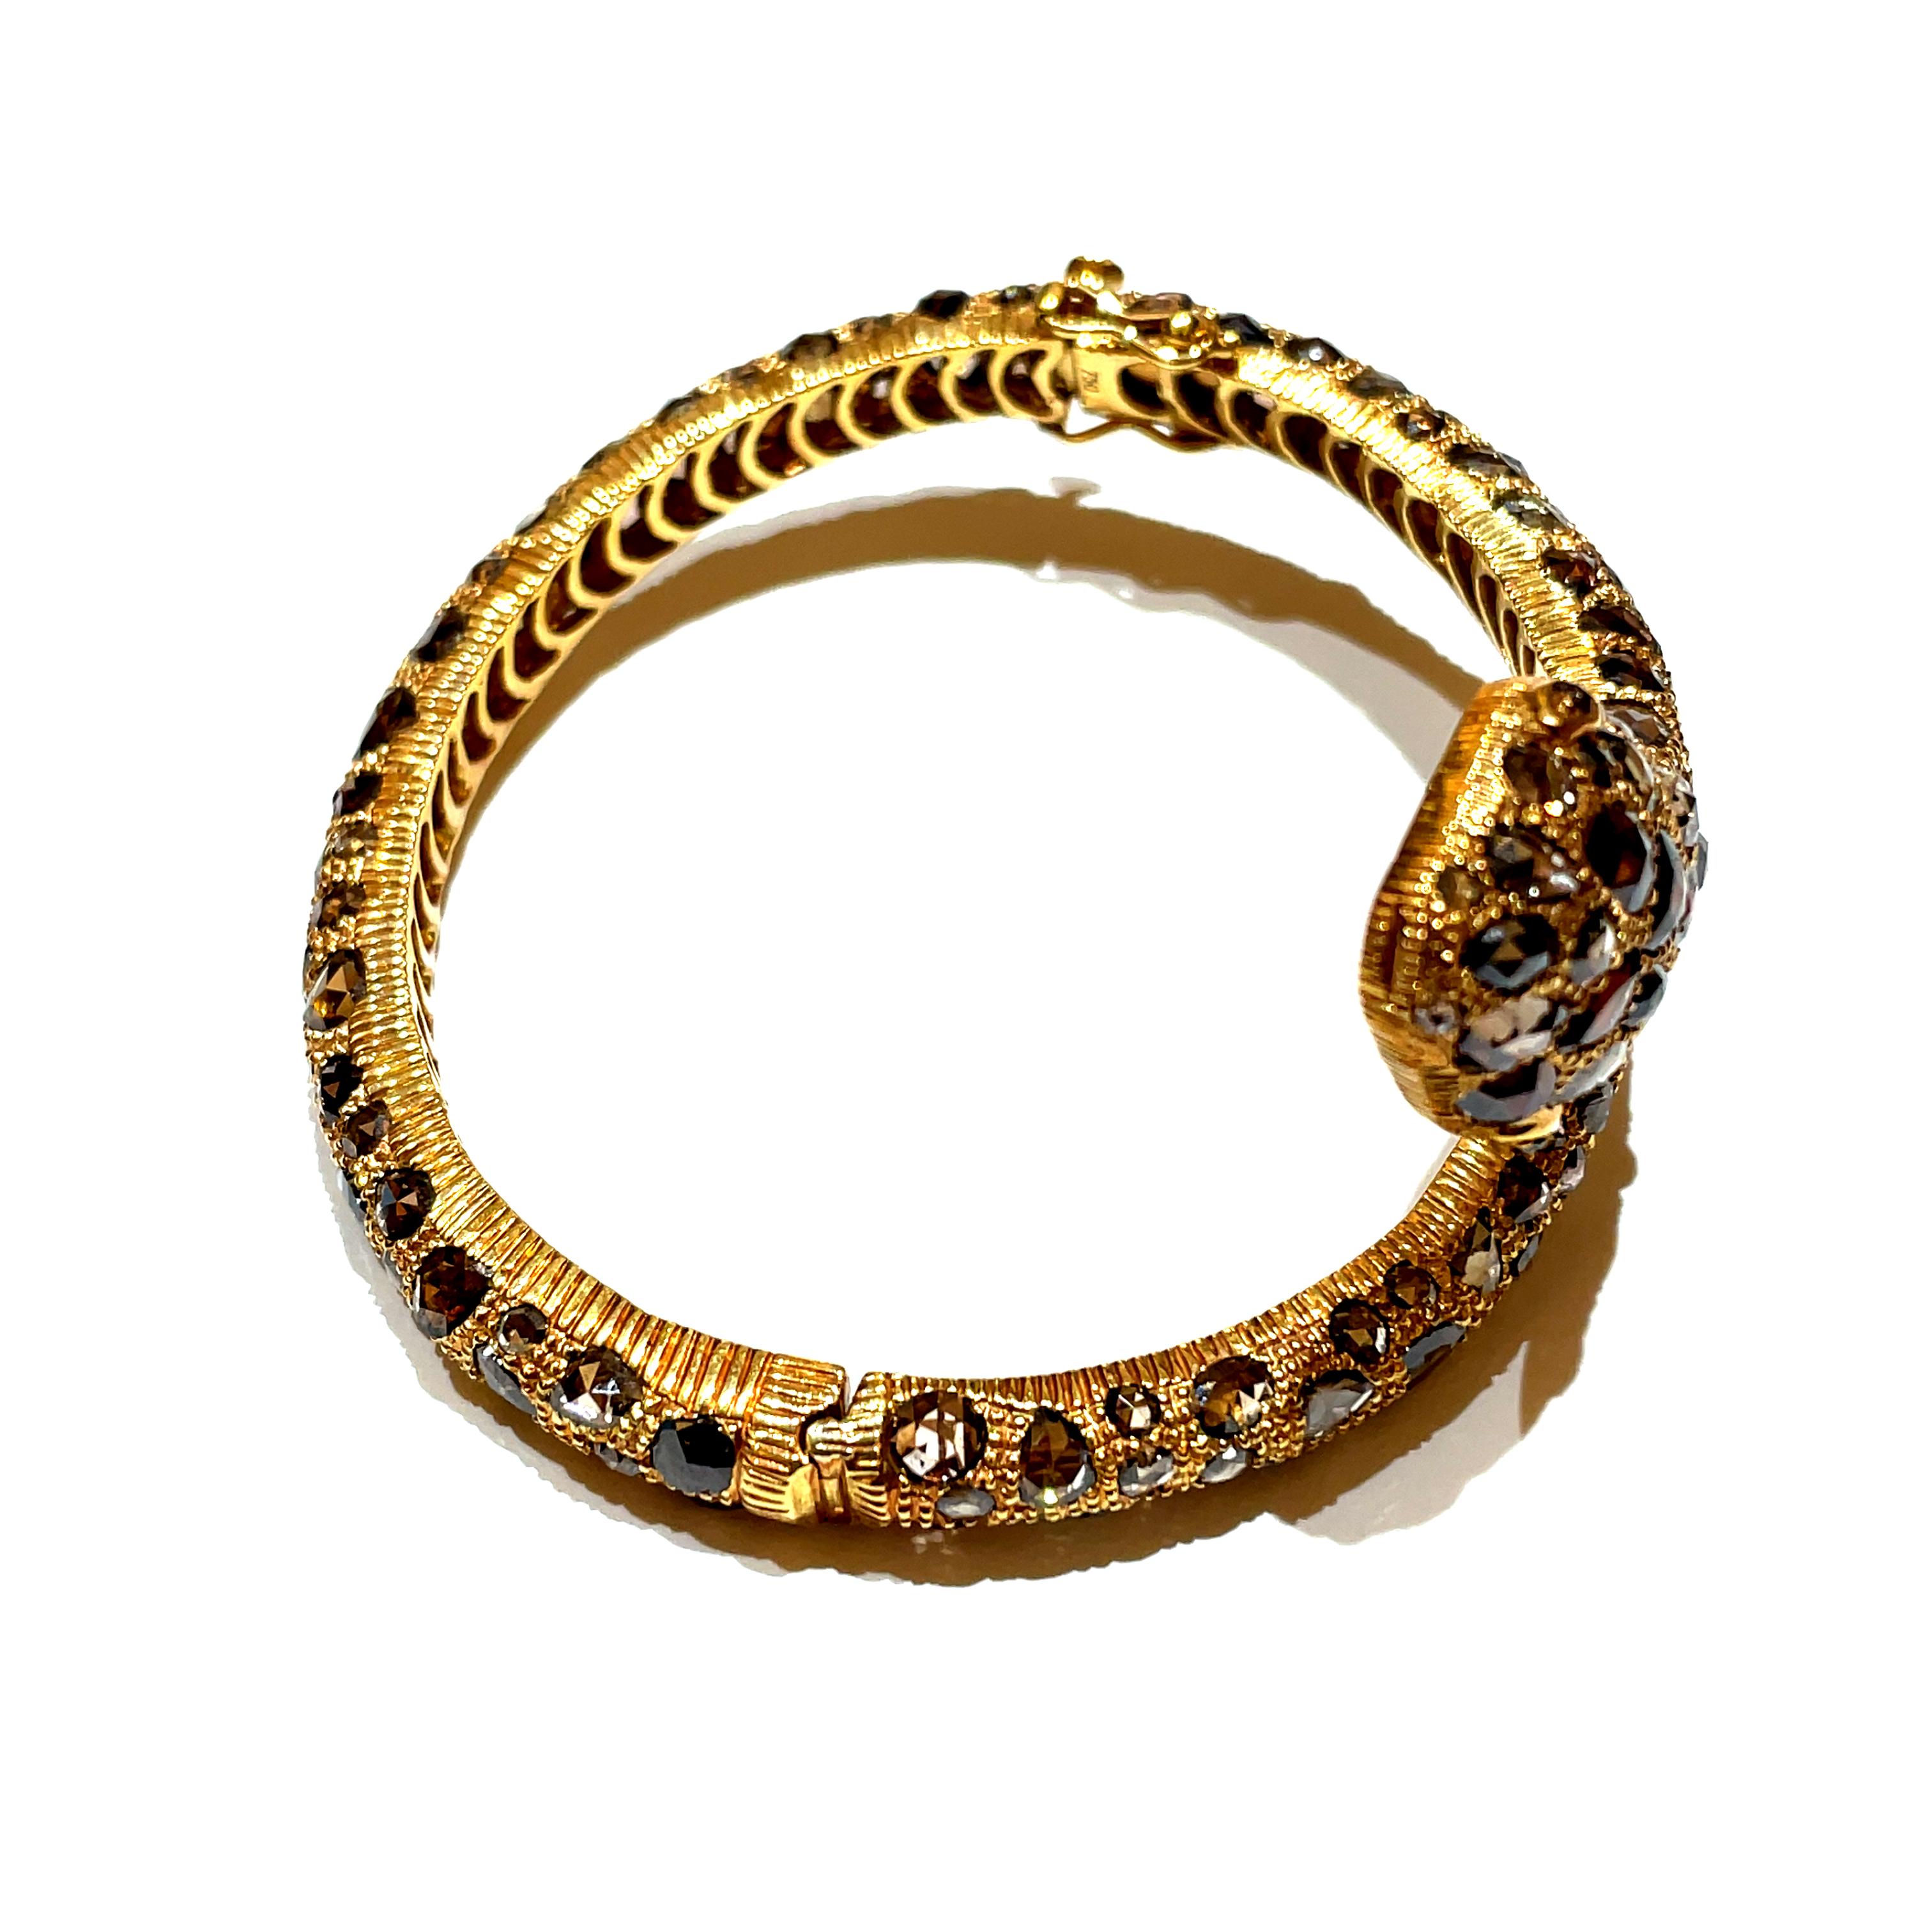 Wrapped around your wrist, the 18k Yellow Gold Glam Snake Bangle unfurls a tale of opulence and allure. 

Its intricate design, embellished with 158 Brown Diamond Rose Cuts totaling 18.46 carats, creates a striking semblance to the mesmerizing